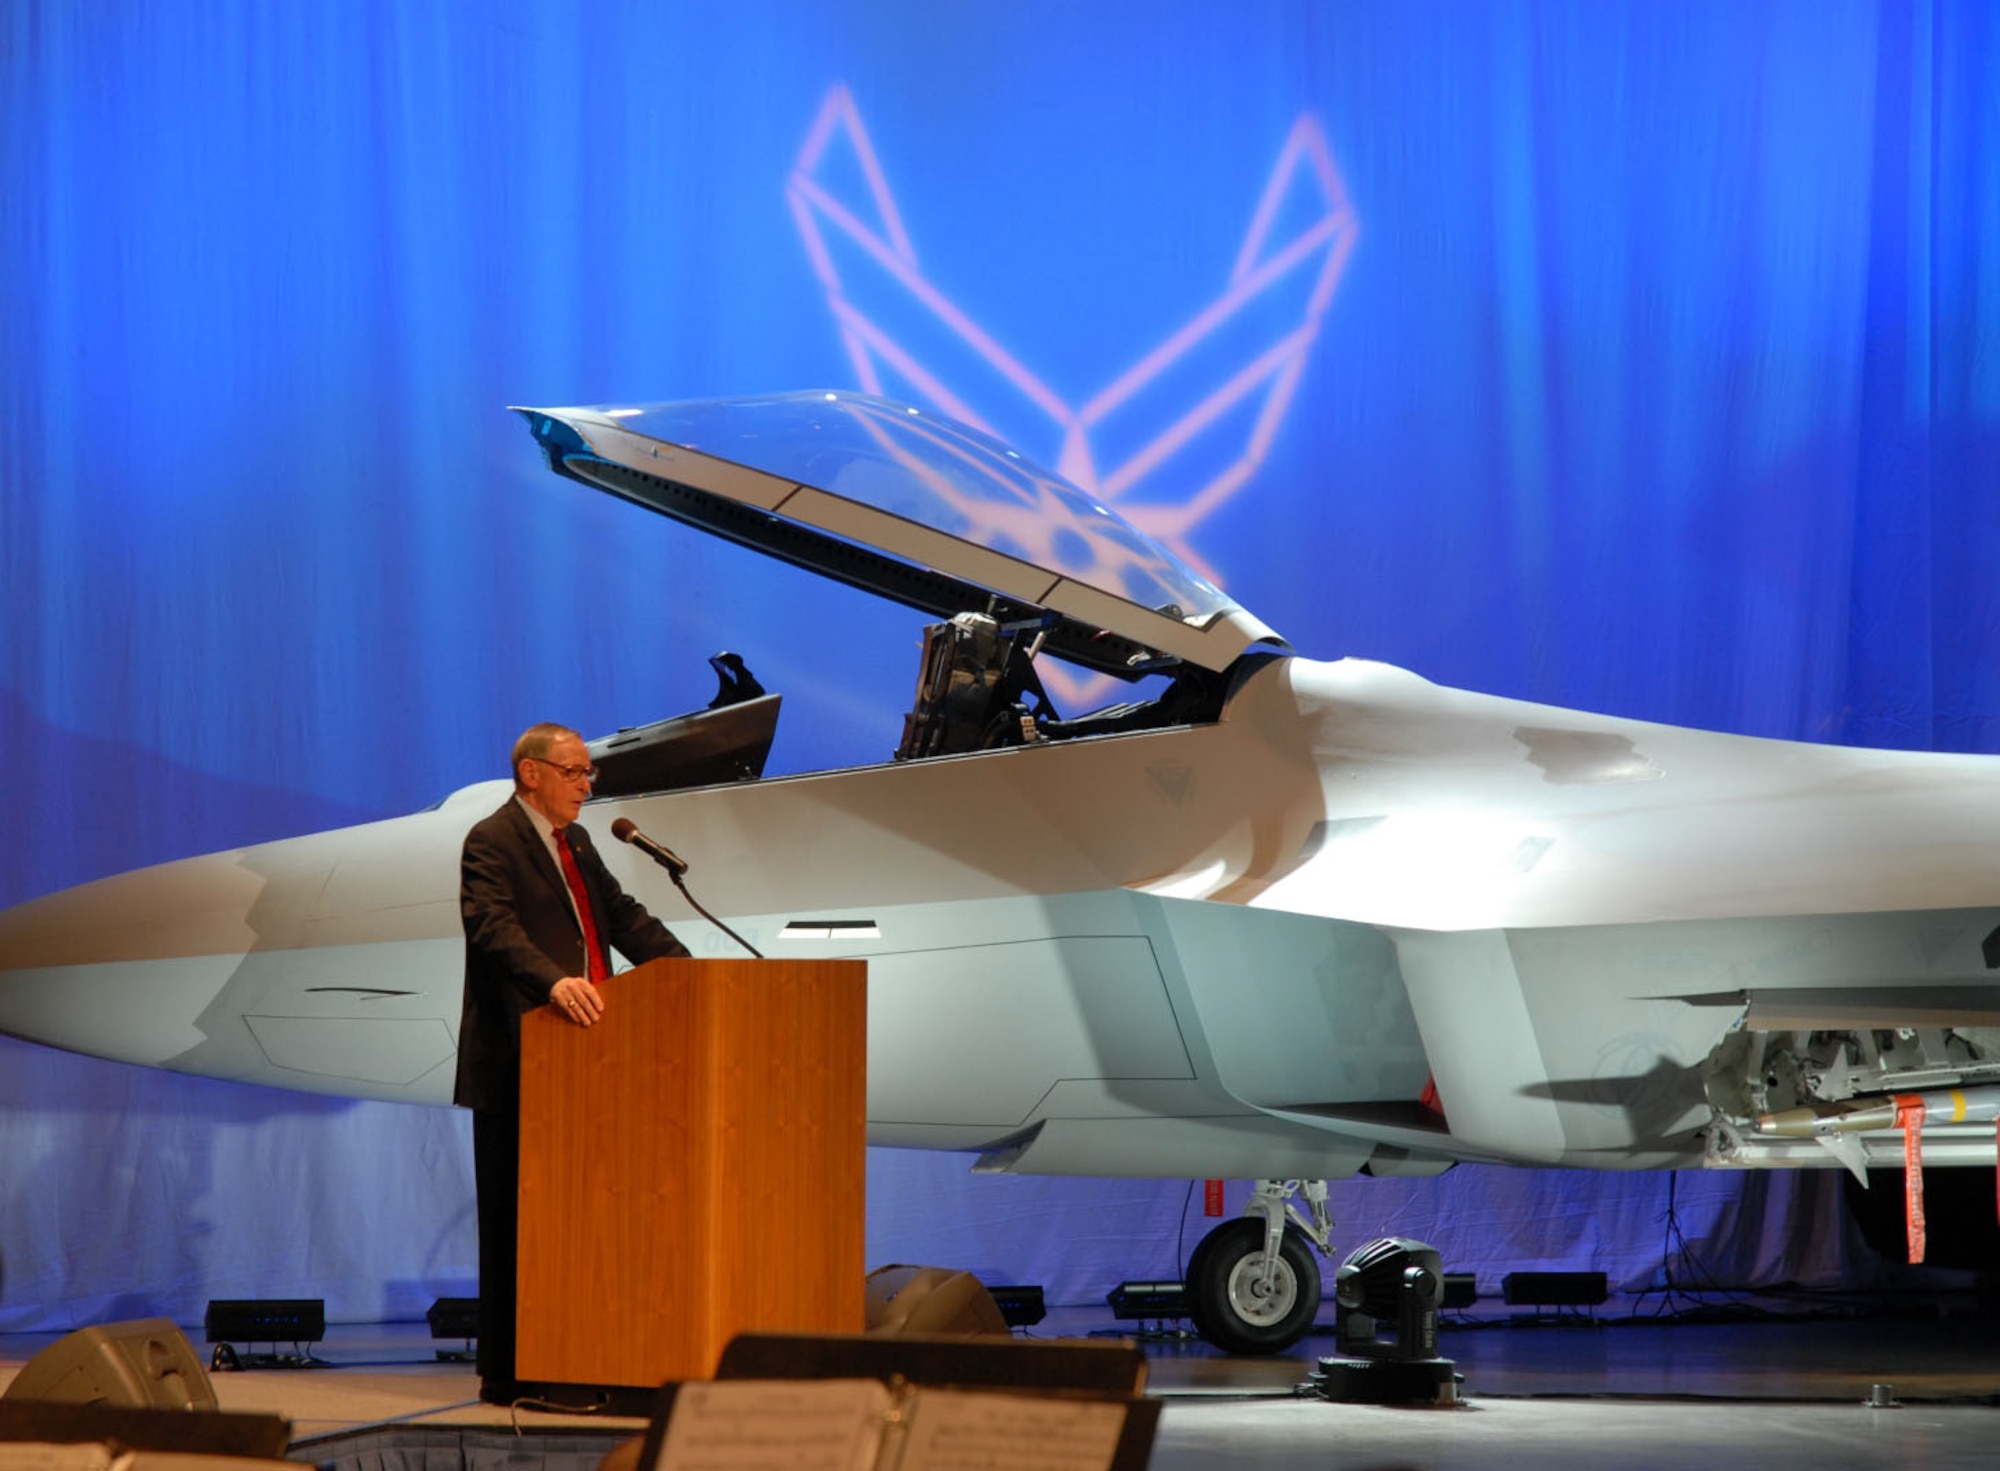 DAYTON, Ohio (1/17/08) - National Museum of the U.S. Air Force Director, Maj. Gen. (Ret.) Charles D. Metcalf, addresses the crowd during the F-22A Raptor exhibit opening ceremony at the National Museum of the U.S. Air Force. (U.S. Air Force photo) 